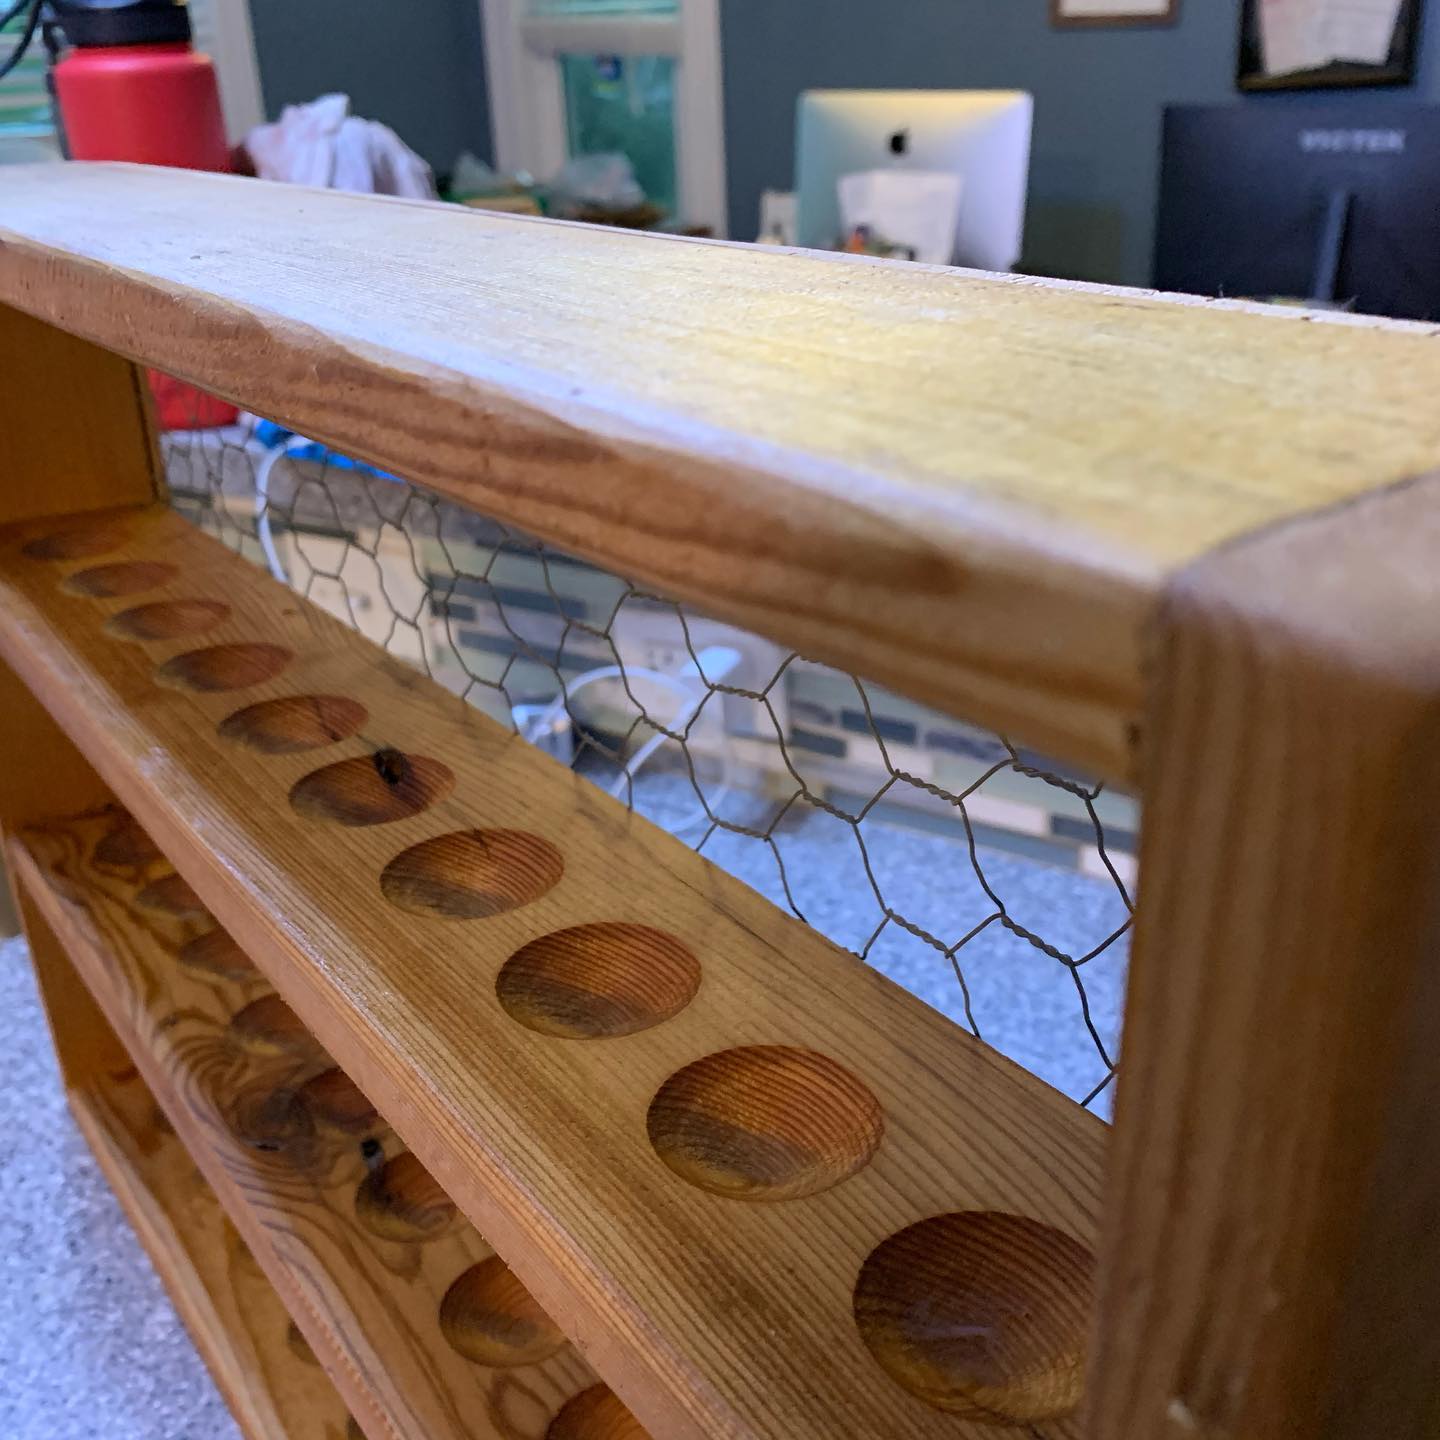 Farmhouse Egg Tray — Rooted Woodworking